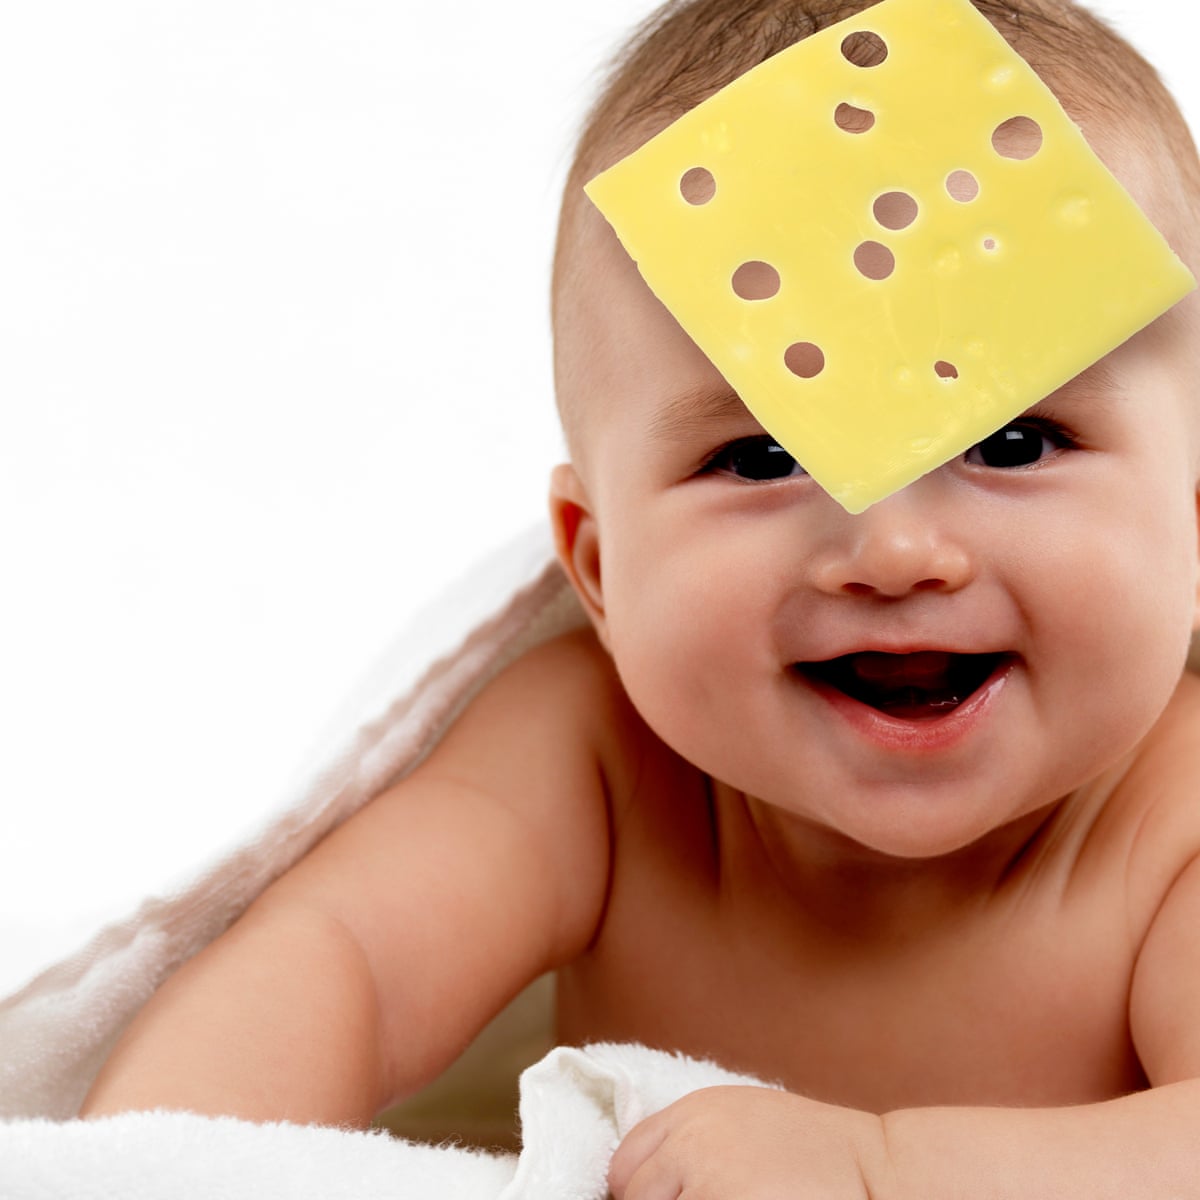 The cheese challenge: why people need to stop throwing cheese slices at  babies' faces | Internet | The Guardian